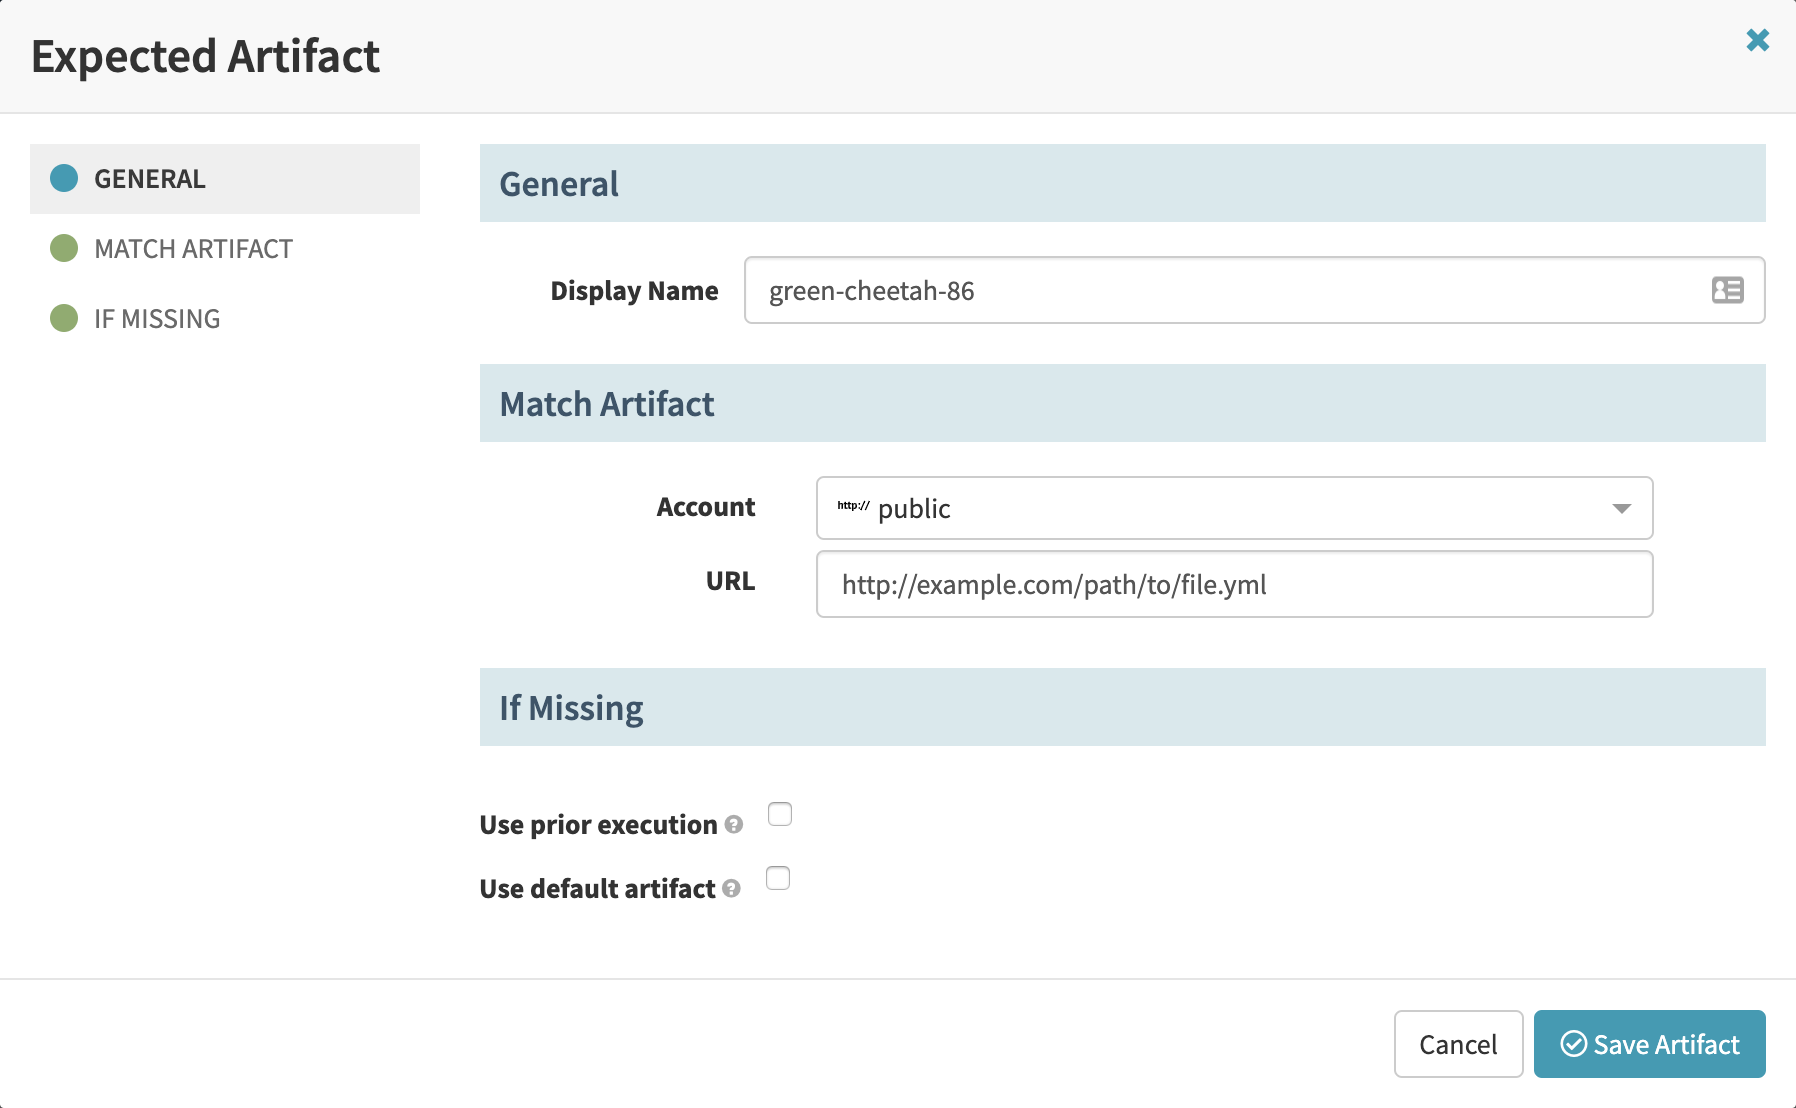 Configuring HTTP file fields in a pipeline trigger&rsquo;s expected artifact settings.